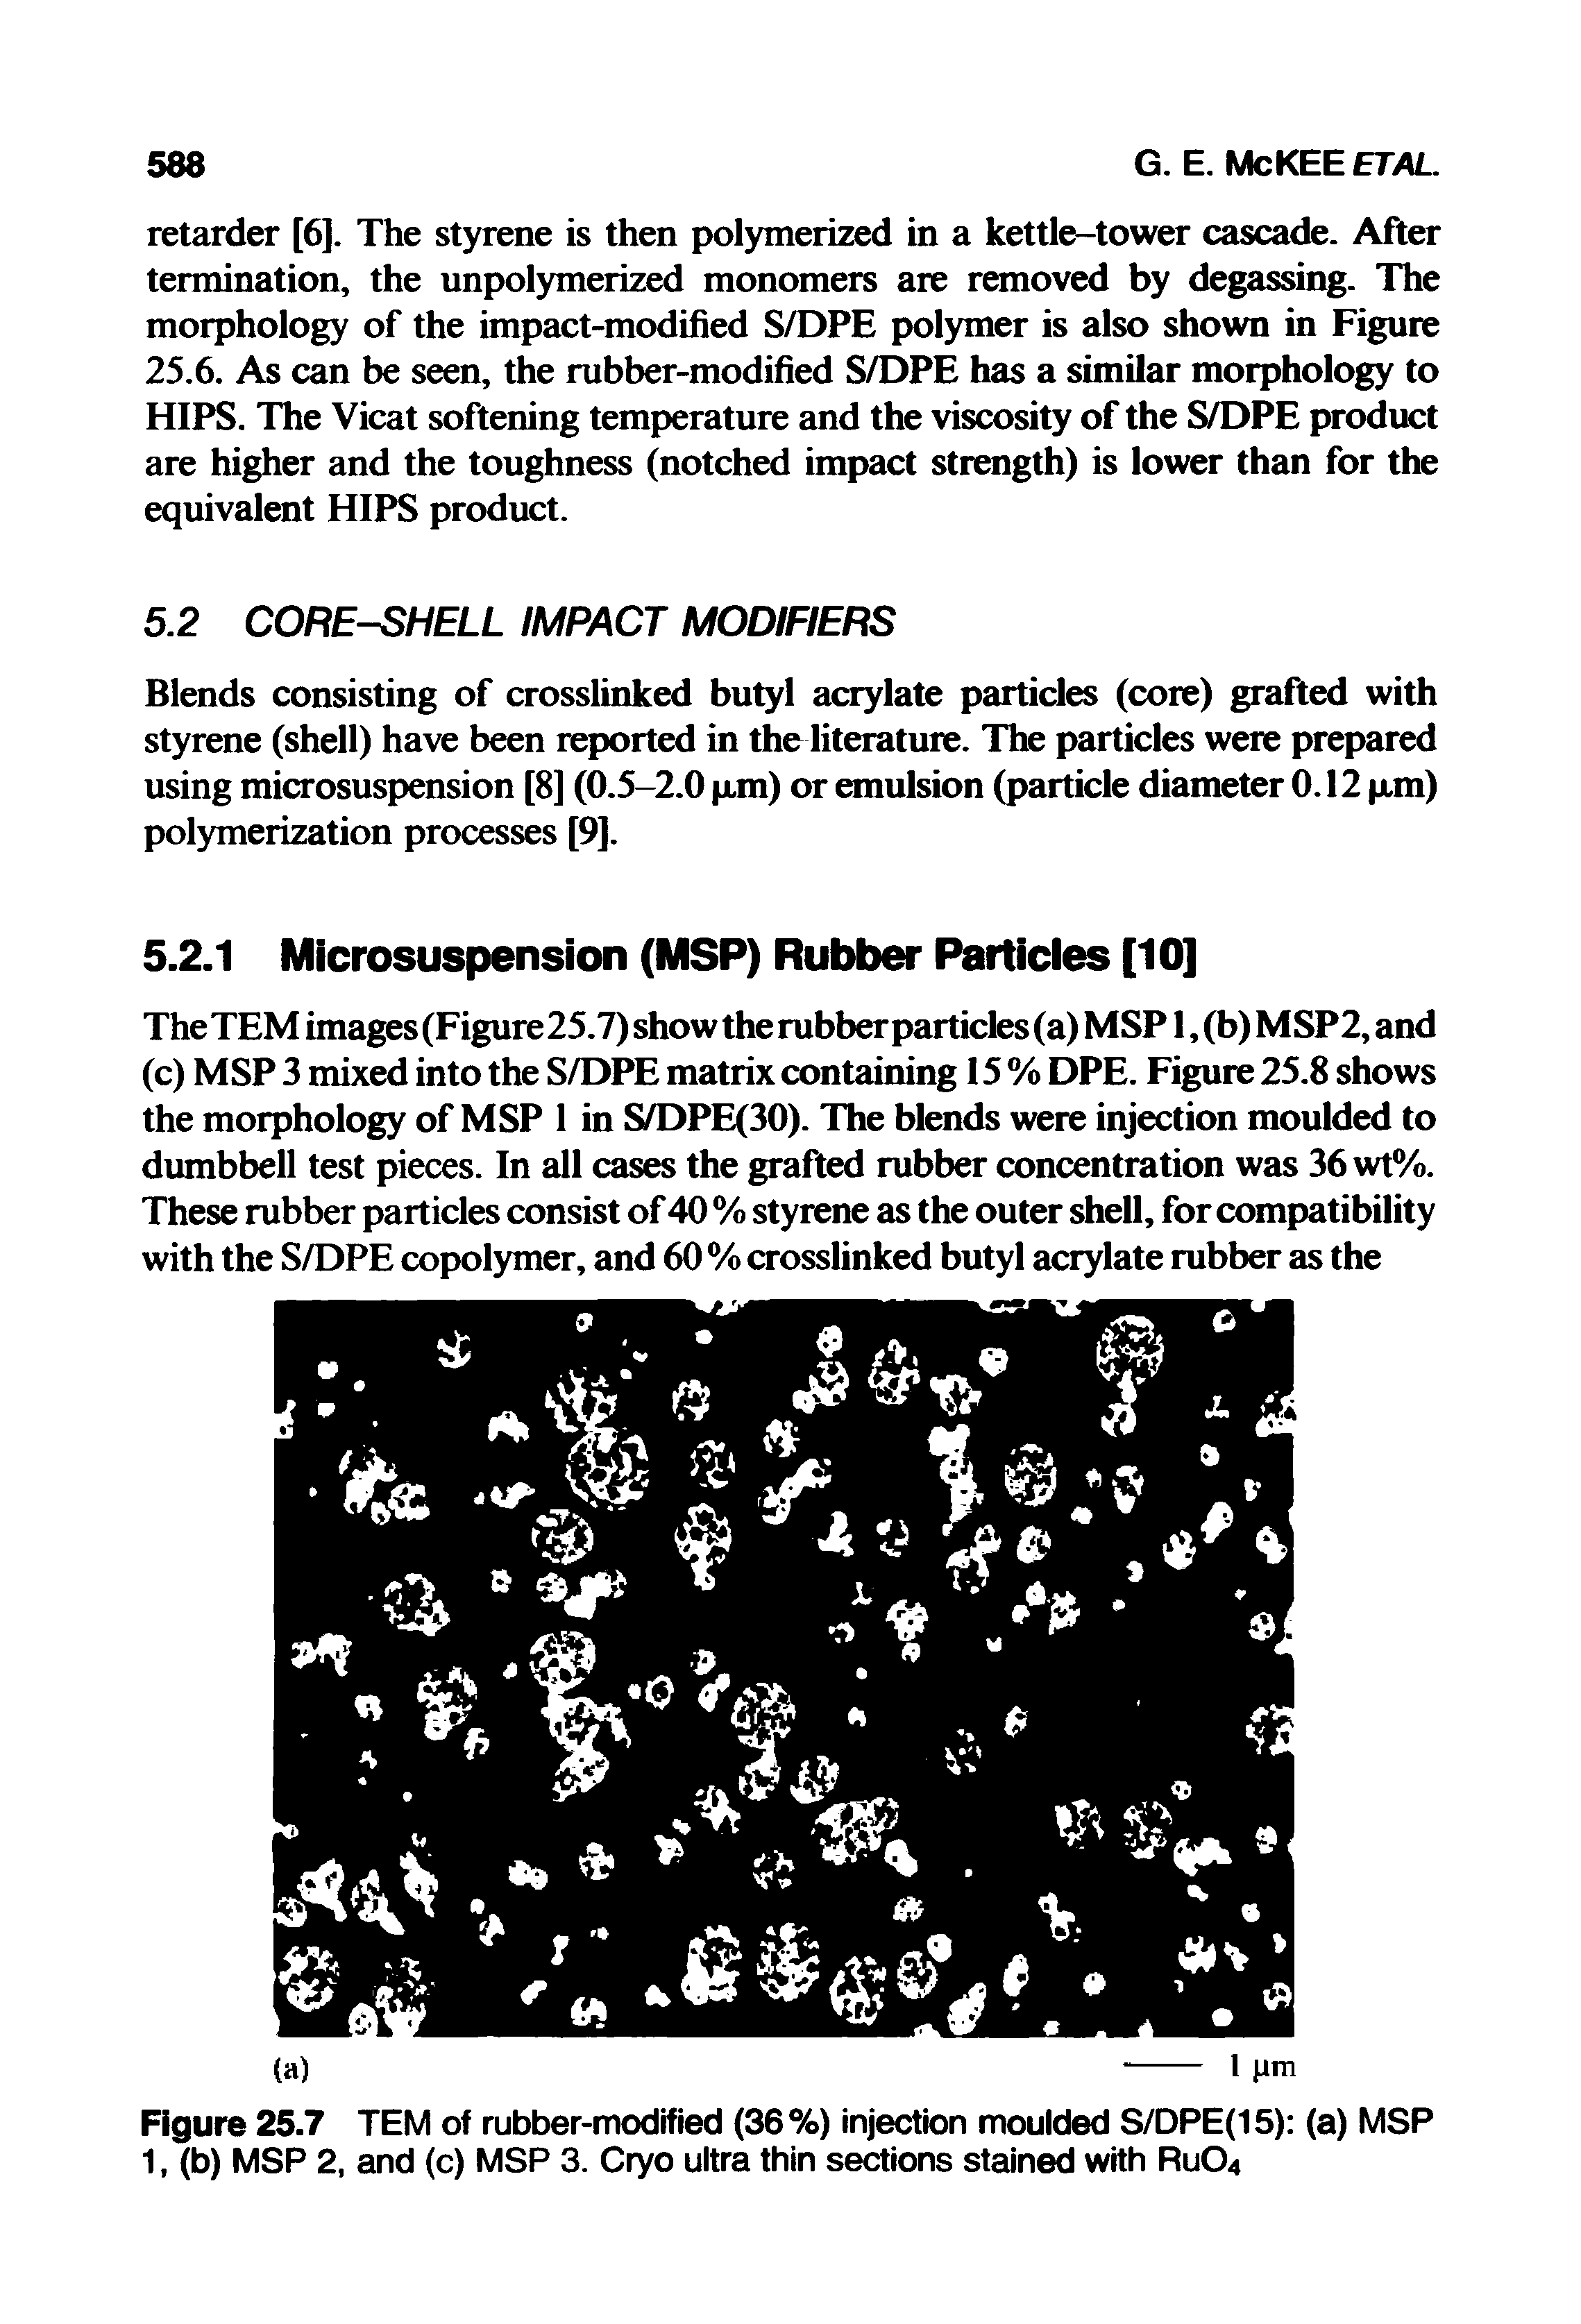 Figure 25.7 TEM of rubber-modified (36%) injection moulded S/DPE(15) (a) MSP 1, (b) MSP 2, and (c) MSP 3. Cryo ultra thin sections stained with Ru04...